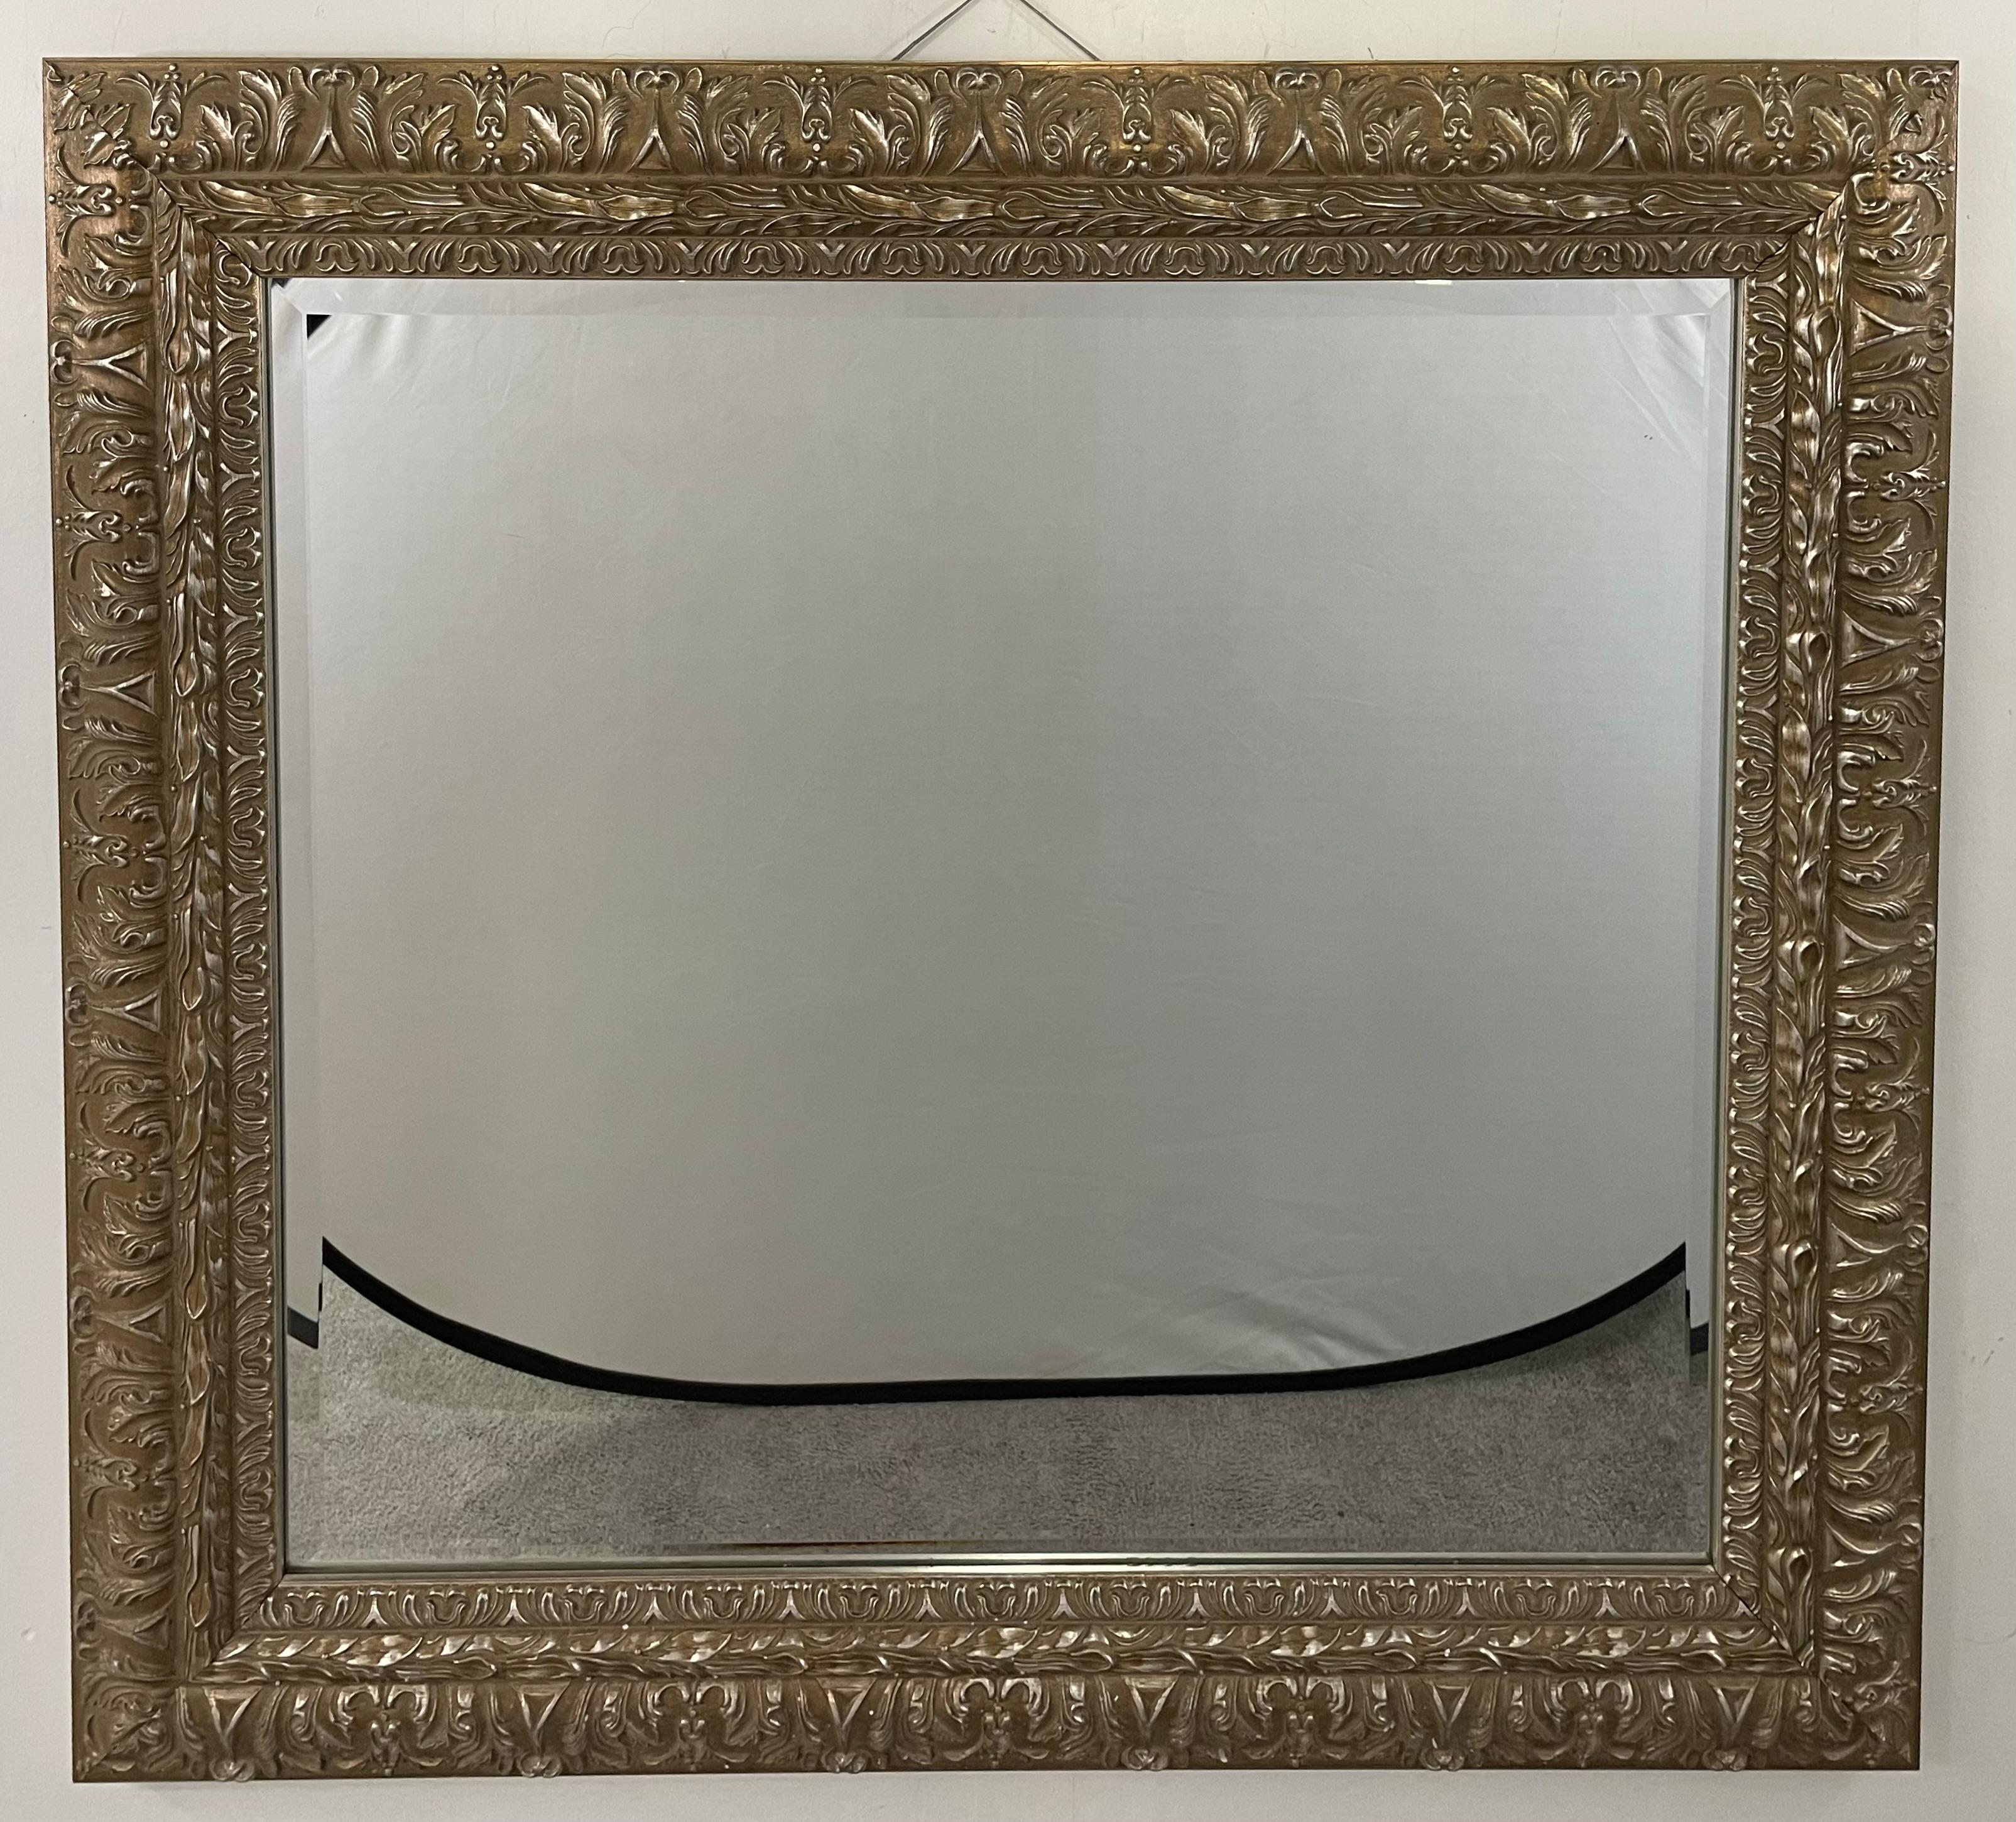 An elegant French Regency style rectangular mirror. The wall or Mantel mirror features detailed hand carving presenting acanthus and leaves motifs all over the frame all made in a silver /champagne color. The beautiful mirror has a beveled glass.